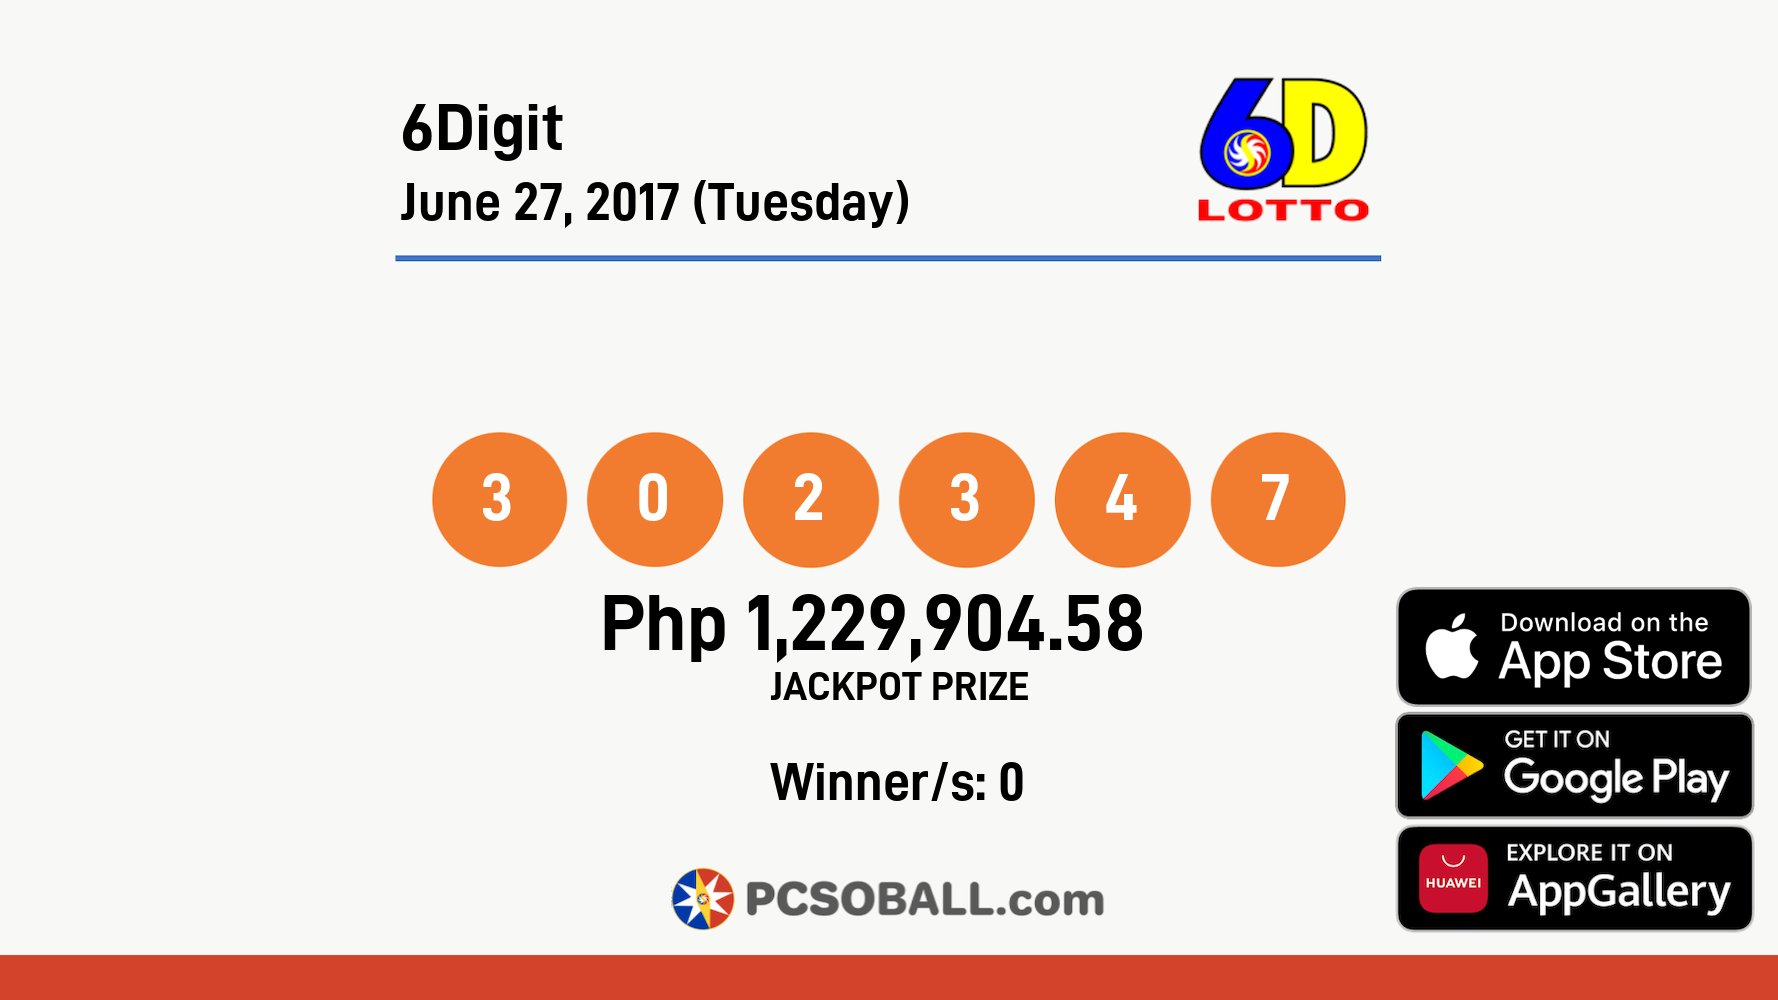 6Digit June 27, 2017 (Tuesday) Result